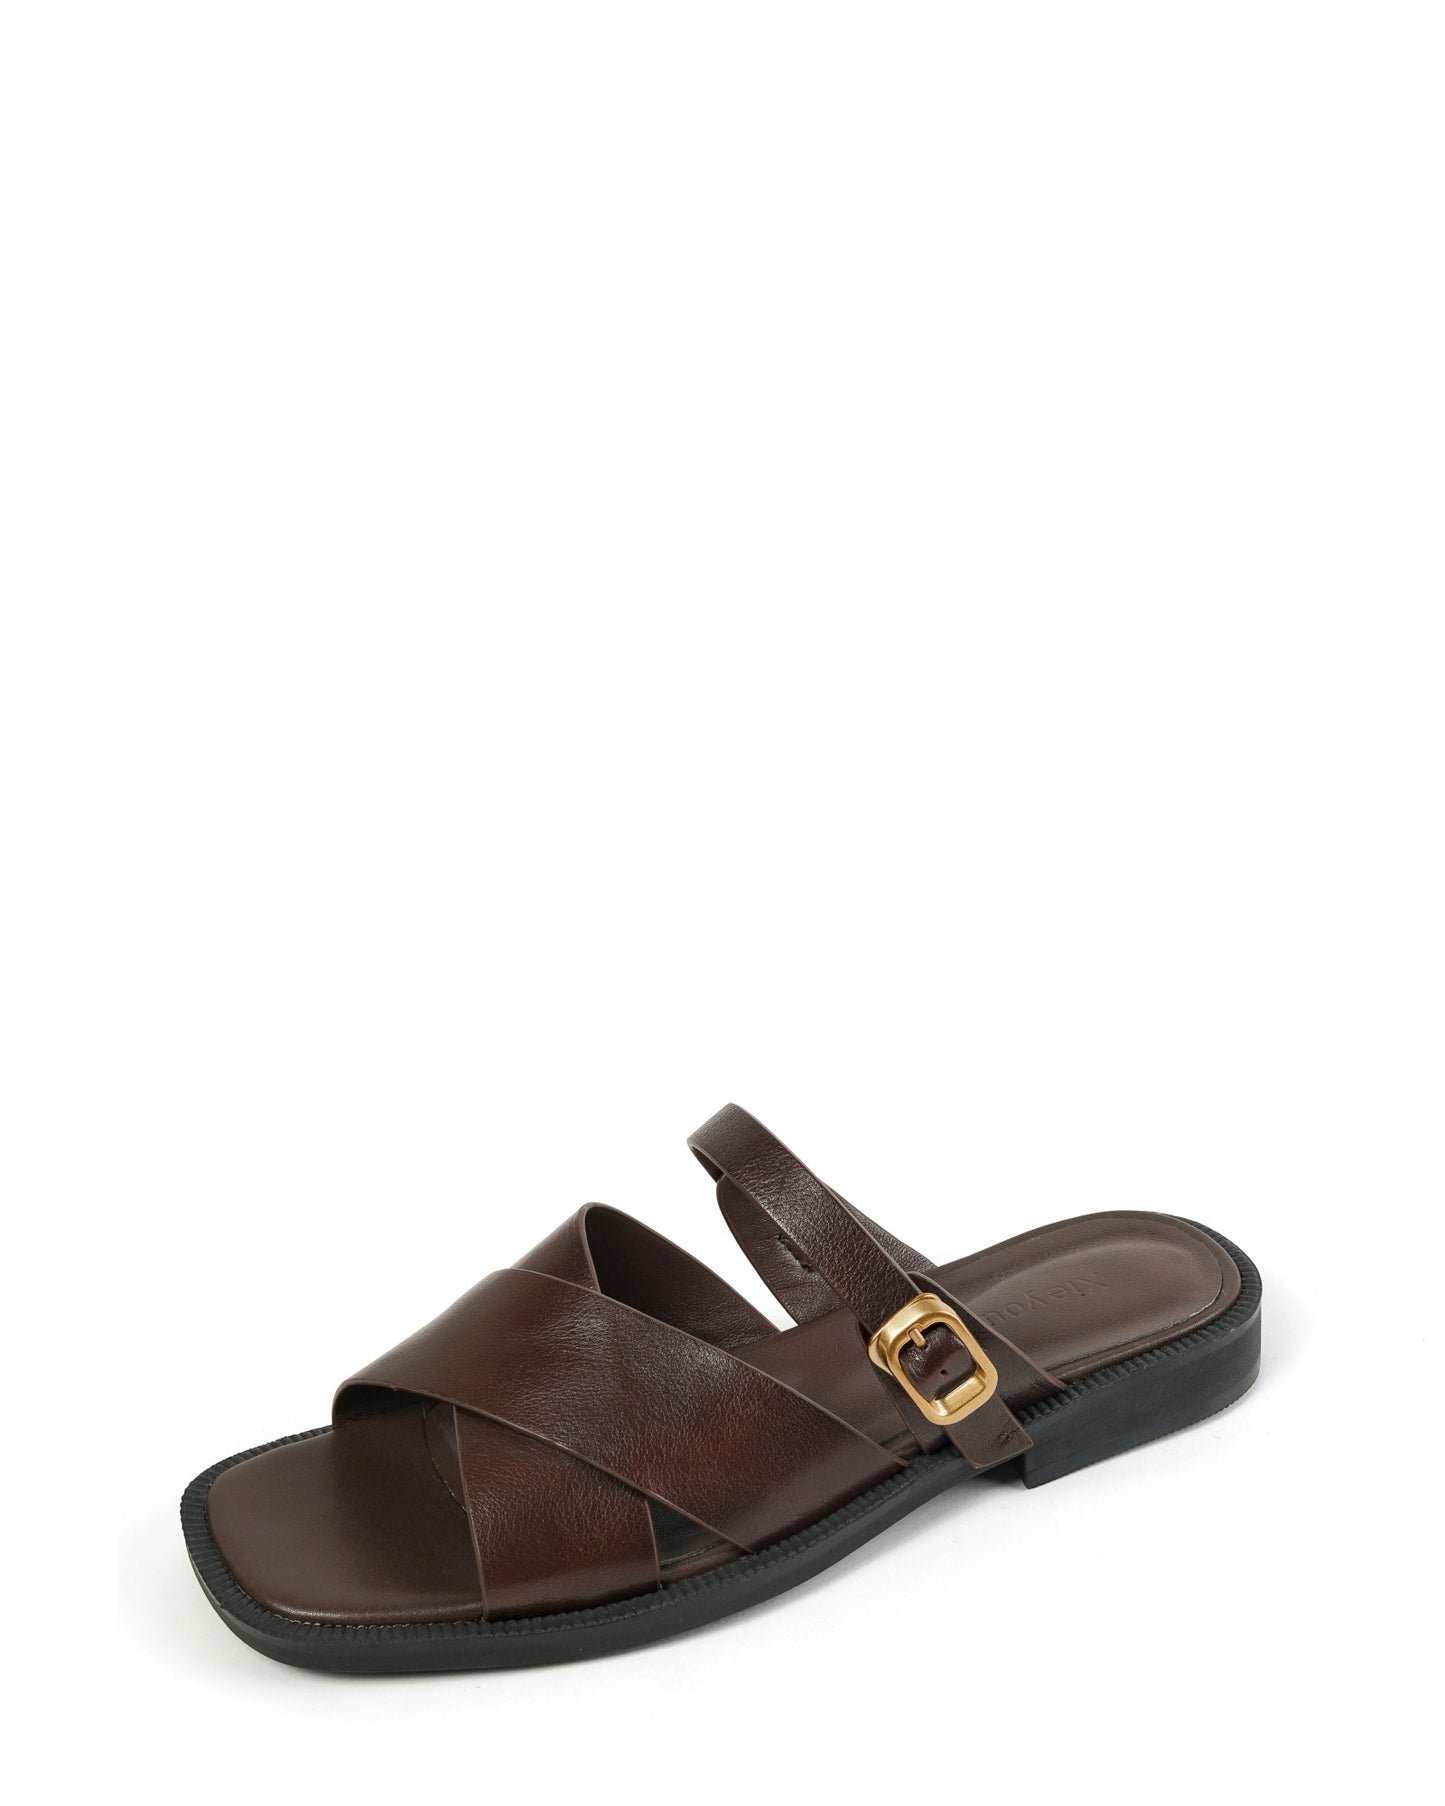 Lido-brown-leather-strap-sandals